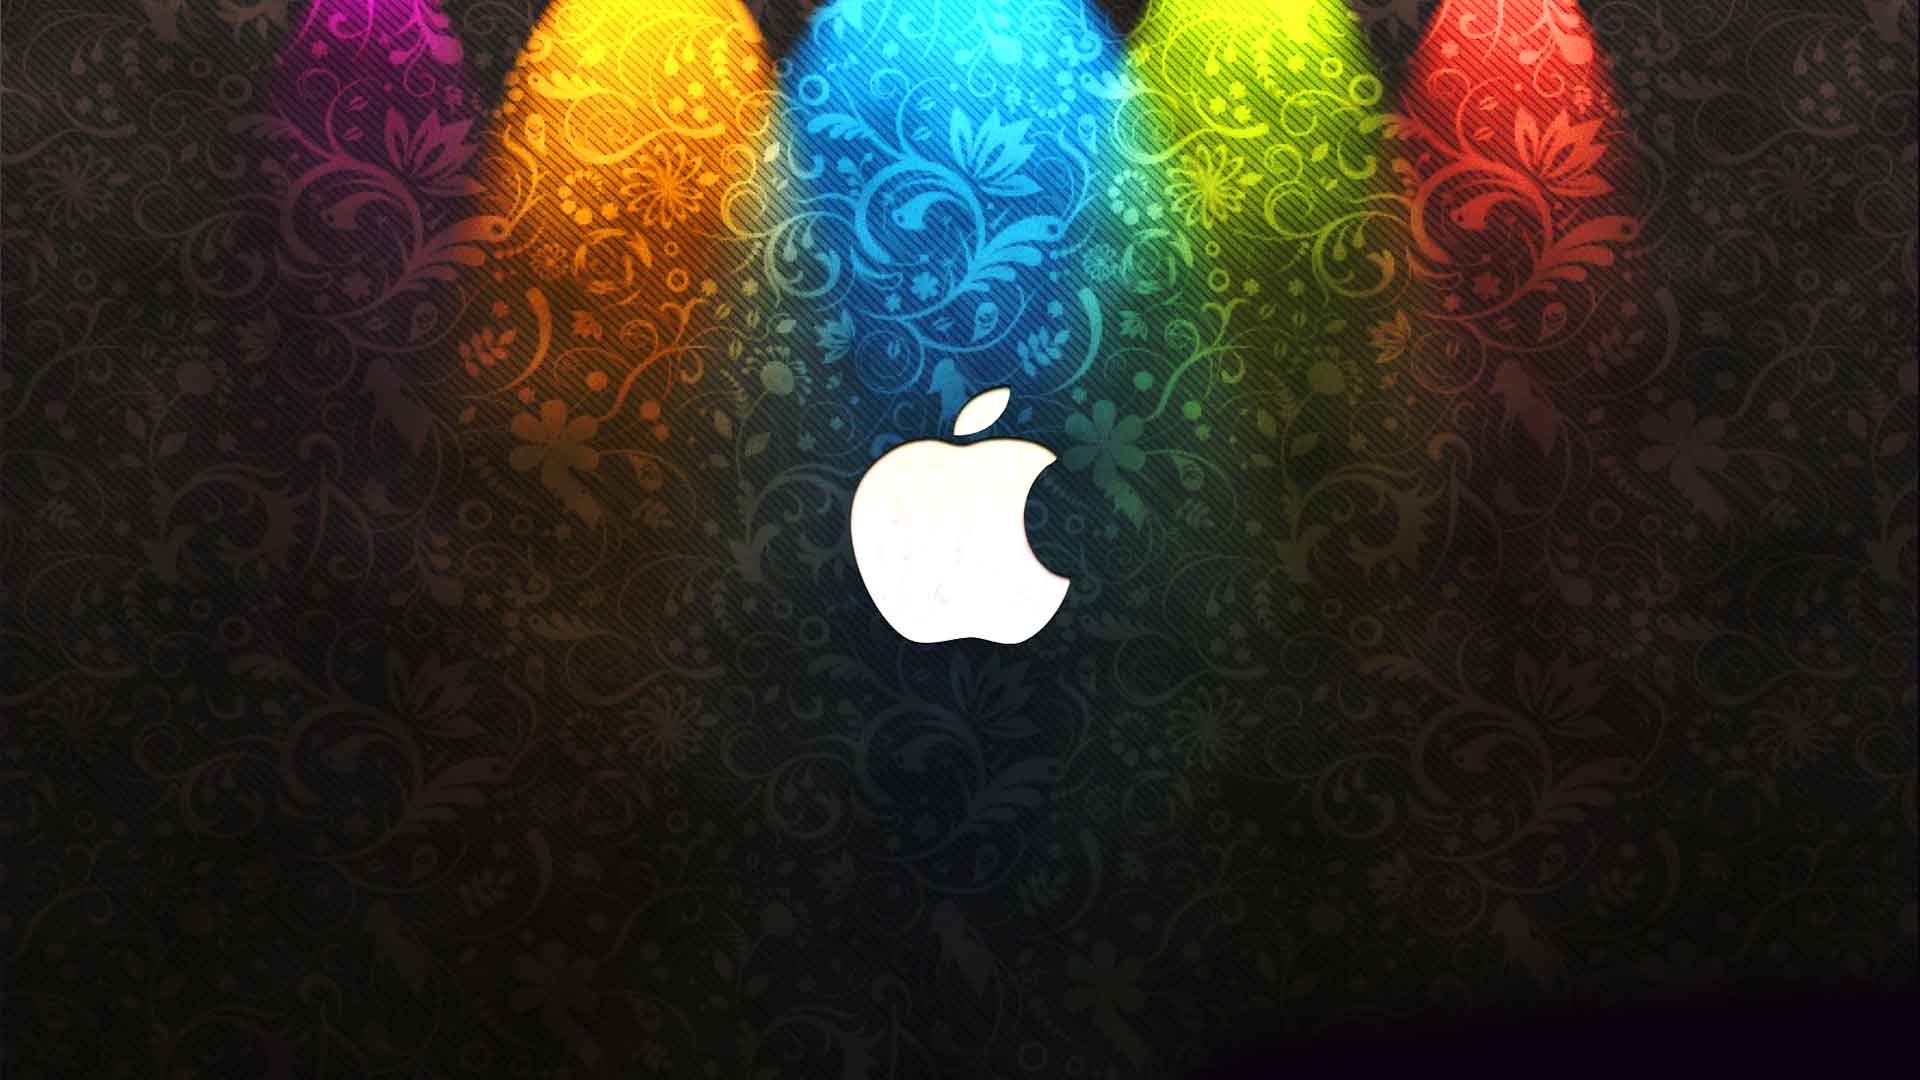 Apple Announces iCloud, OS X Lion and iOS 5 at WWDC 2011